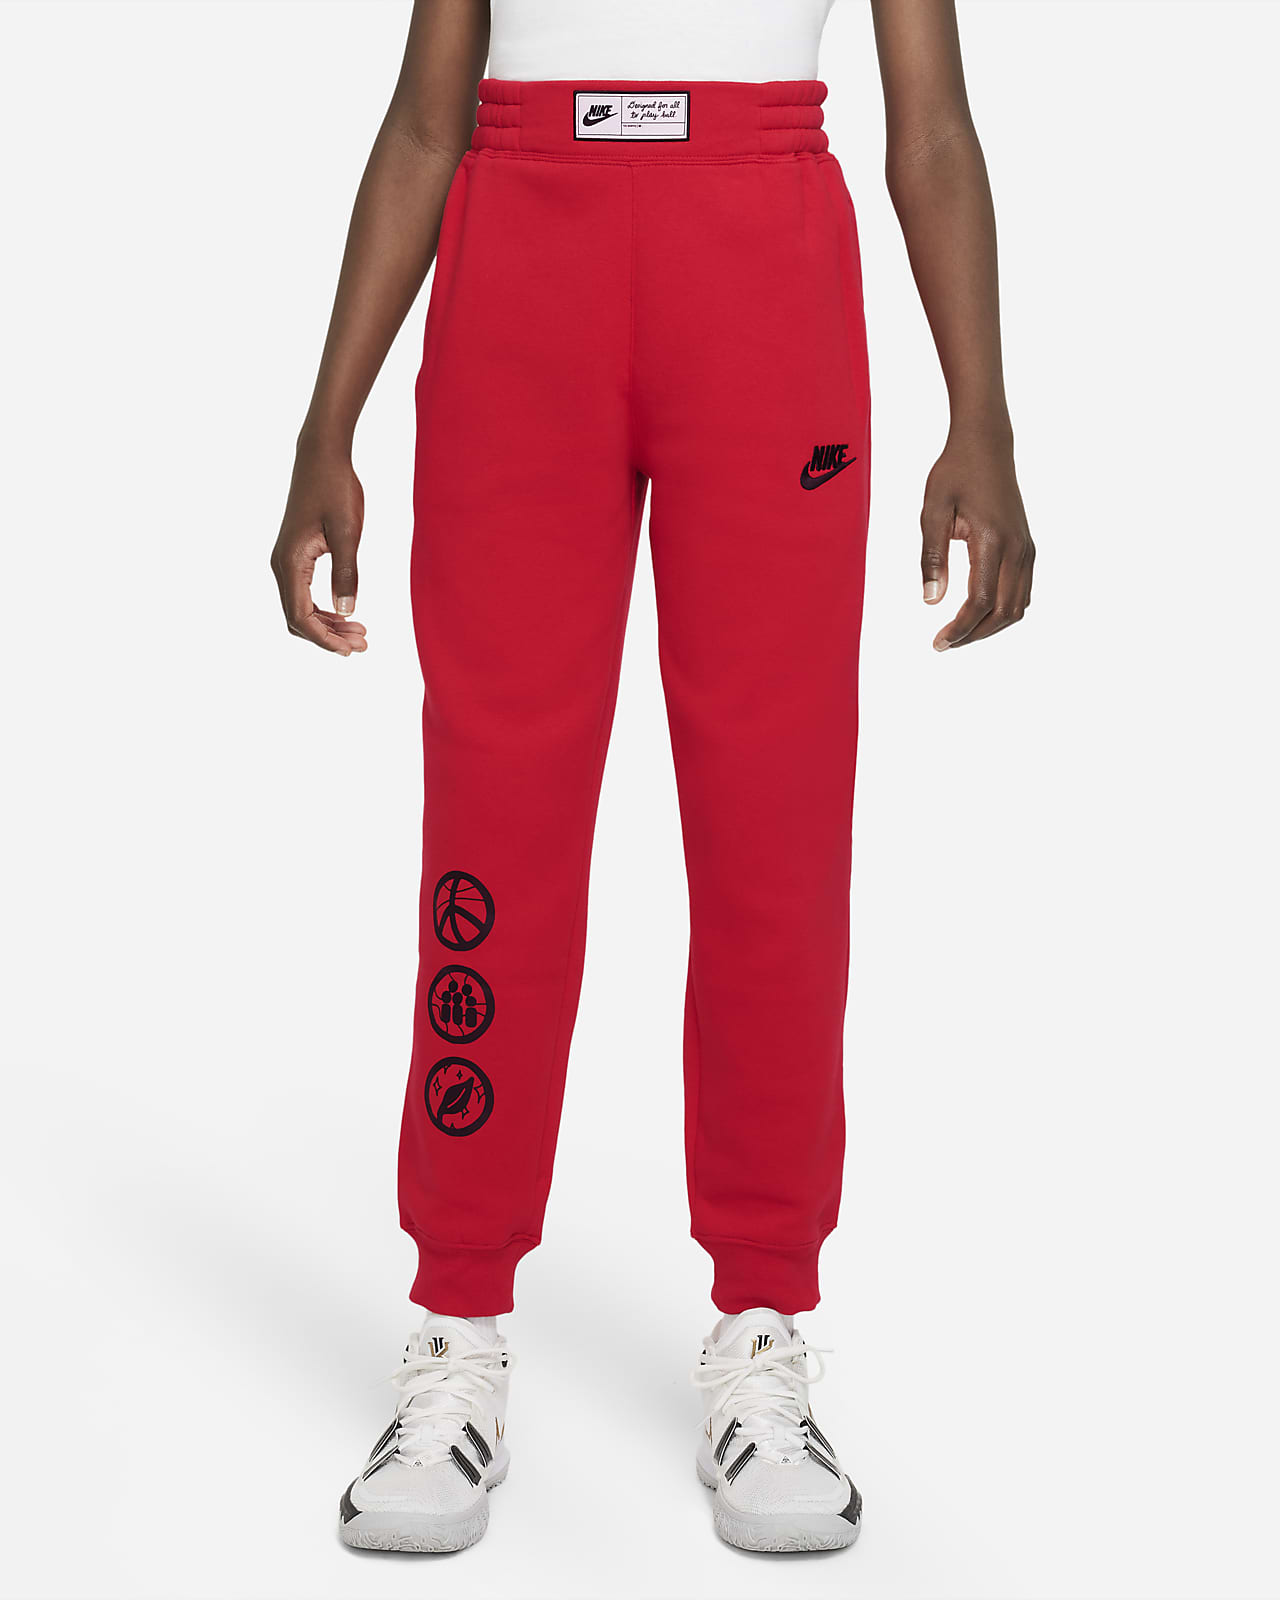 Nike Culture of Basketball Older Kids' (Boys') Trousers